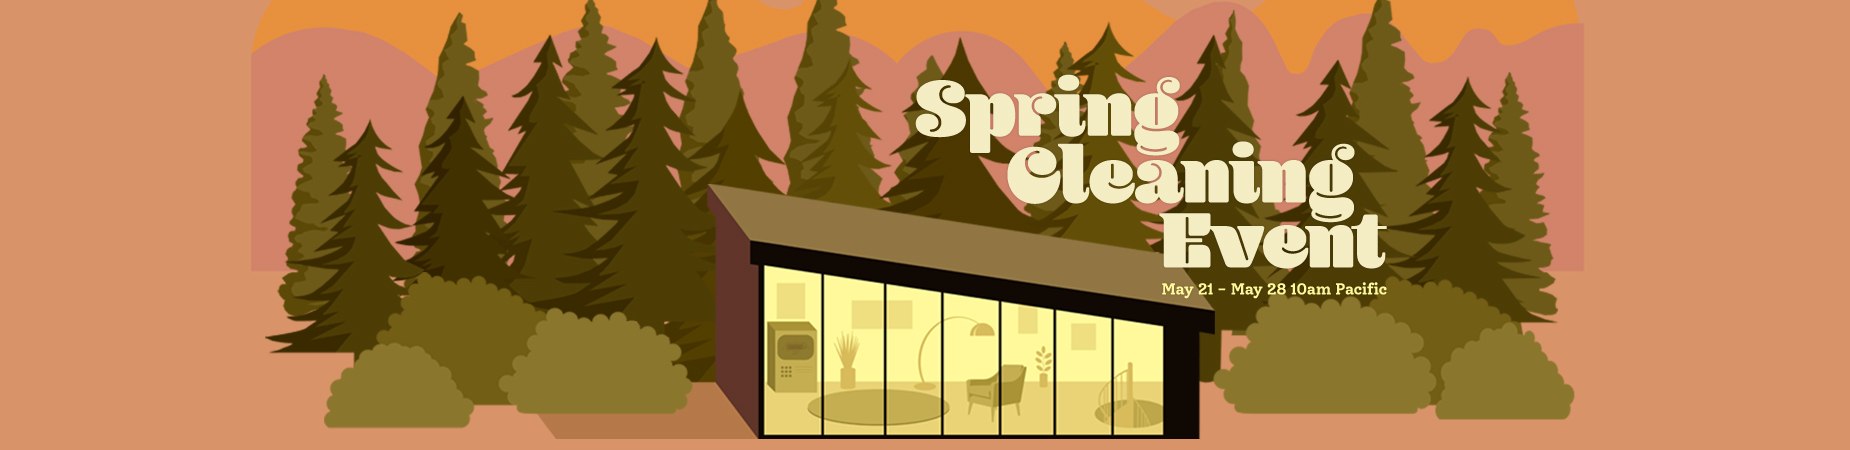 steam spring cleaning event 2018